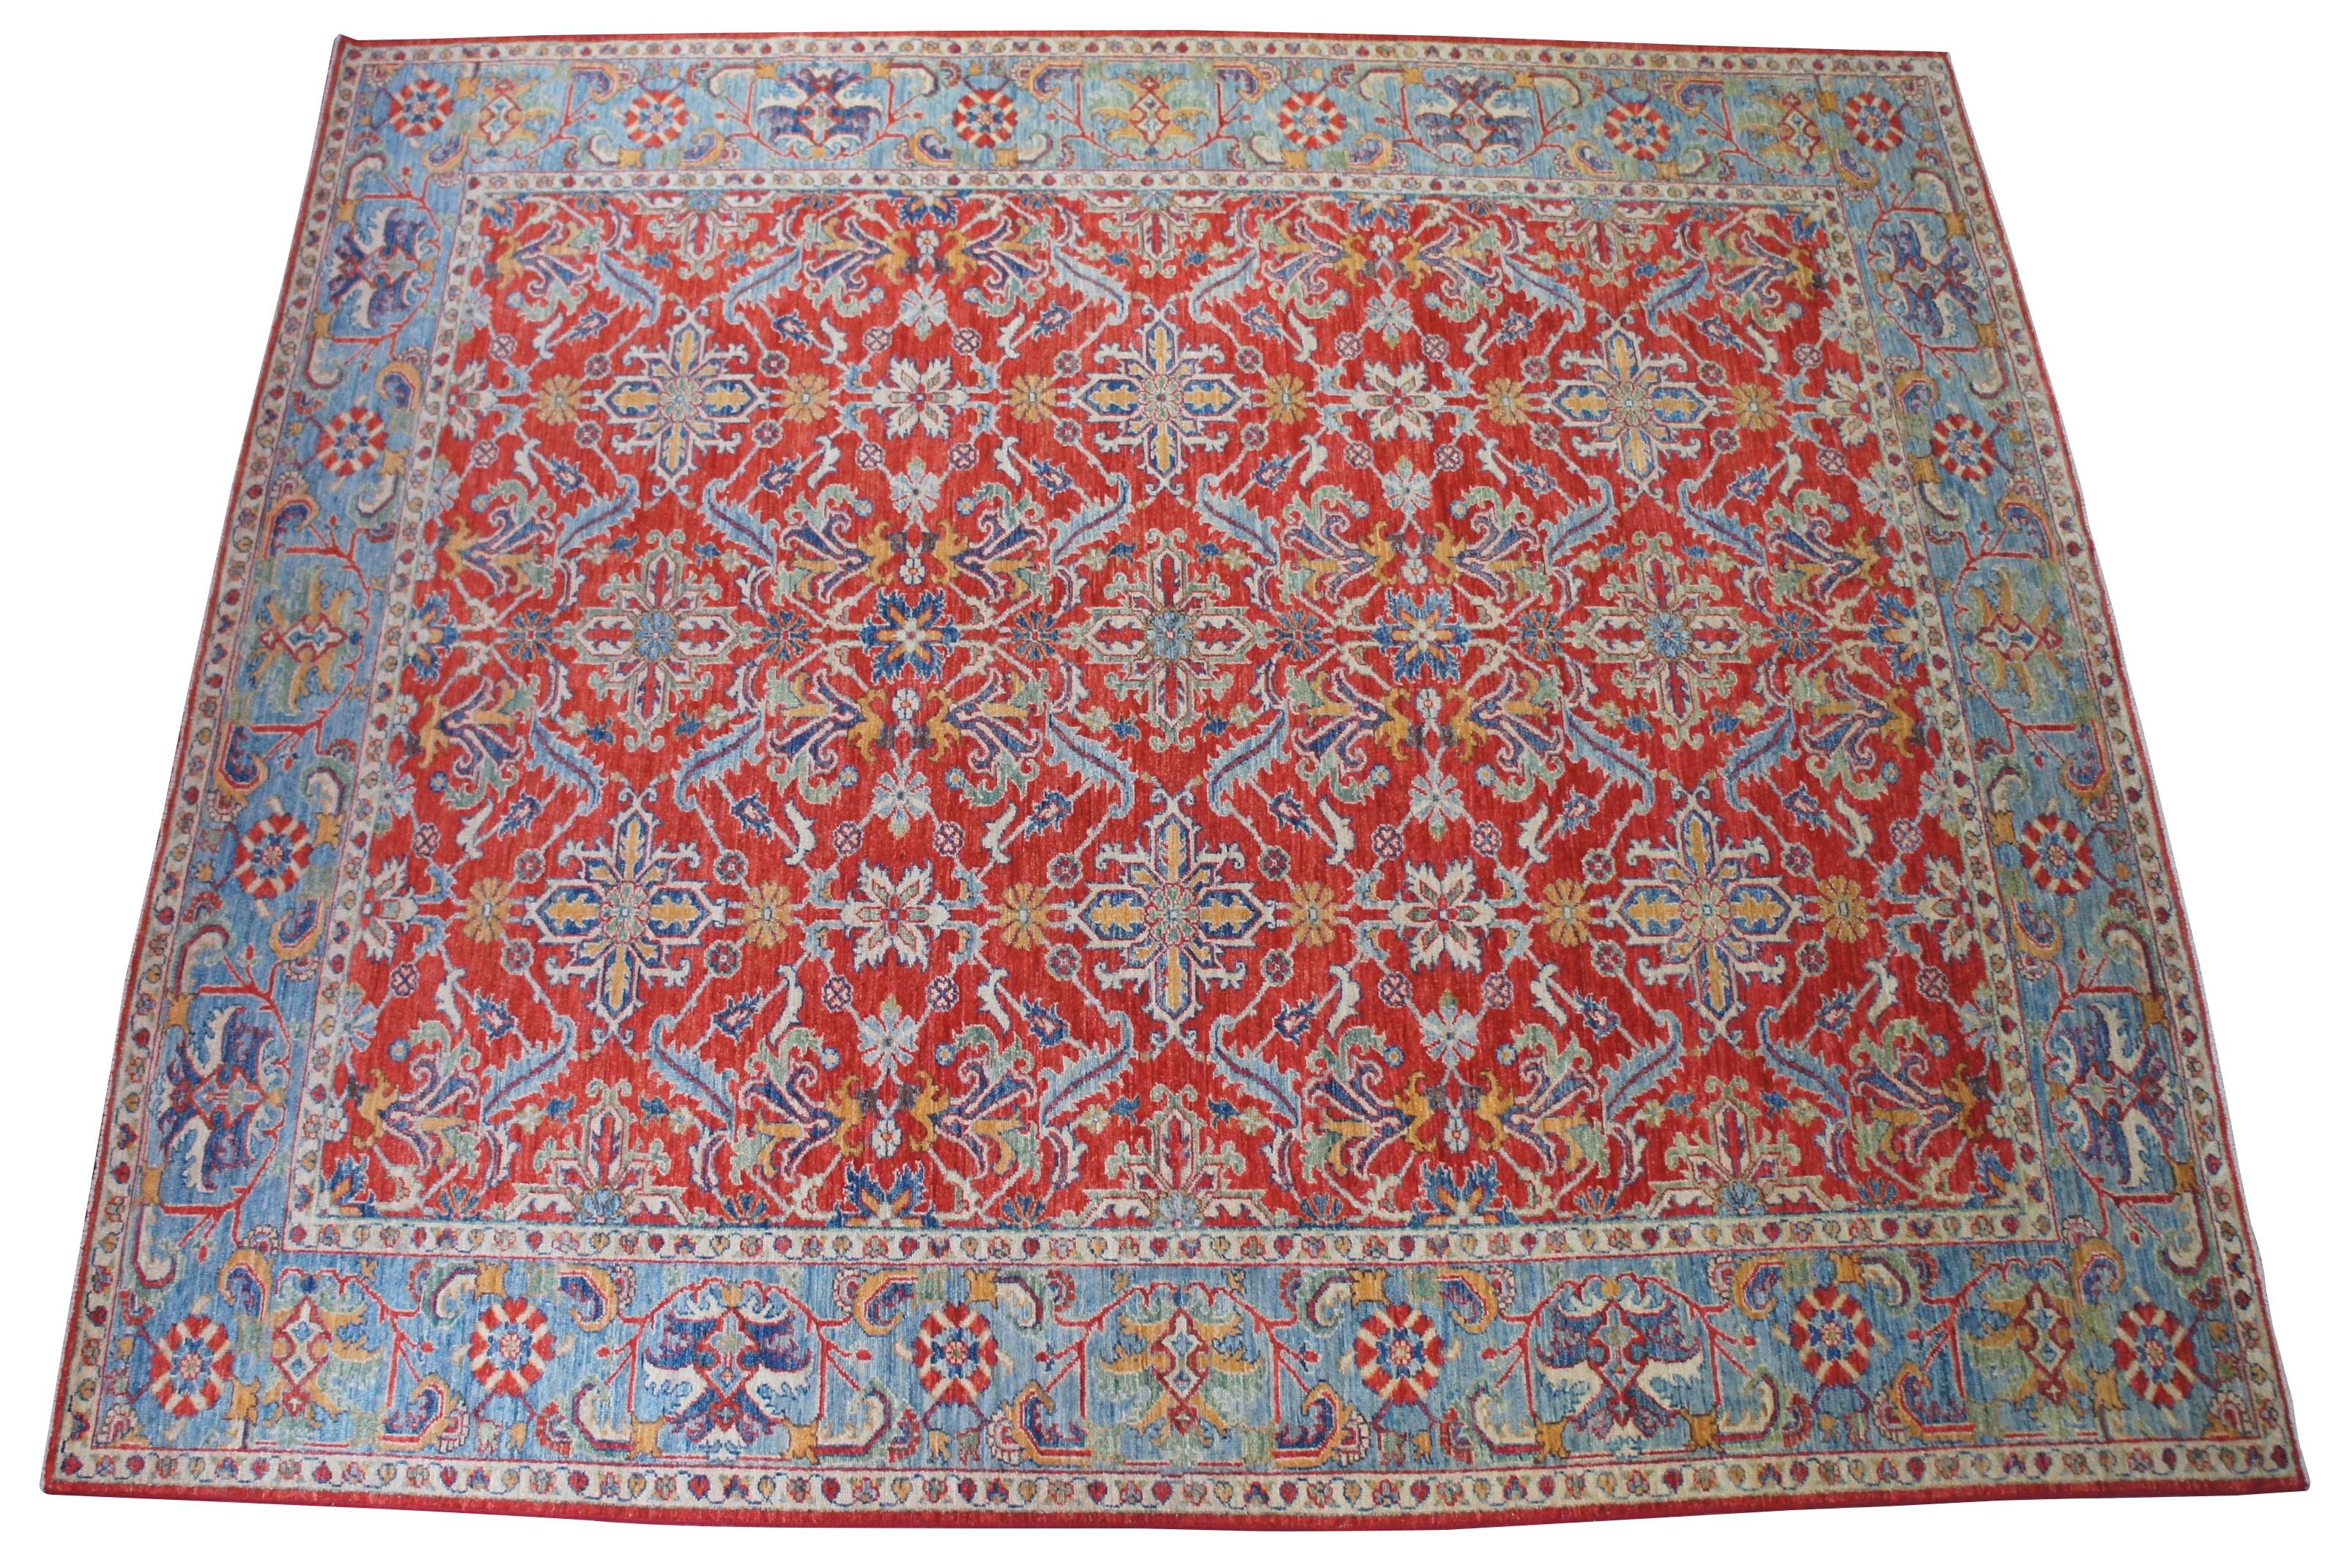 Vintage Pakistan area rug or carpet featuring florals / hearts and a field of red with blues, greens, orange and tan. Measures: 8.5' x 9.